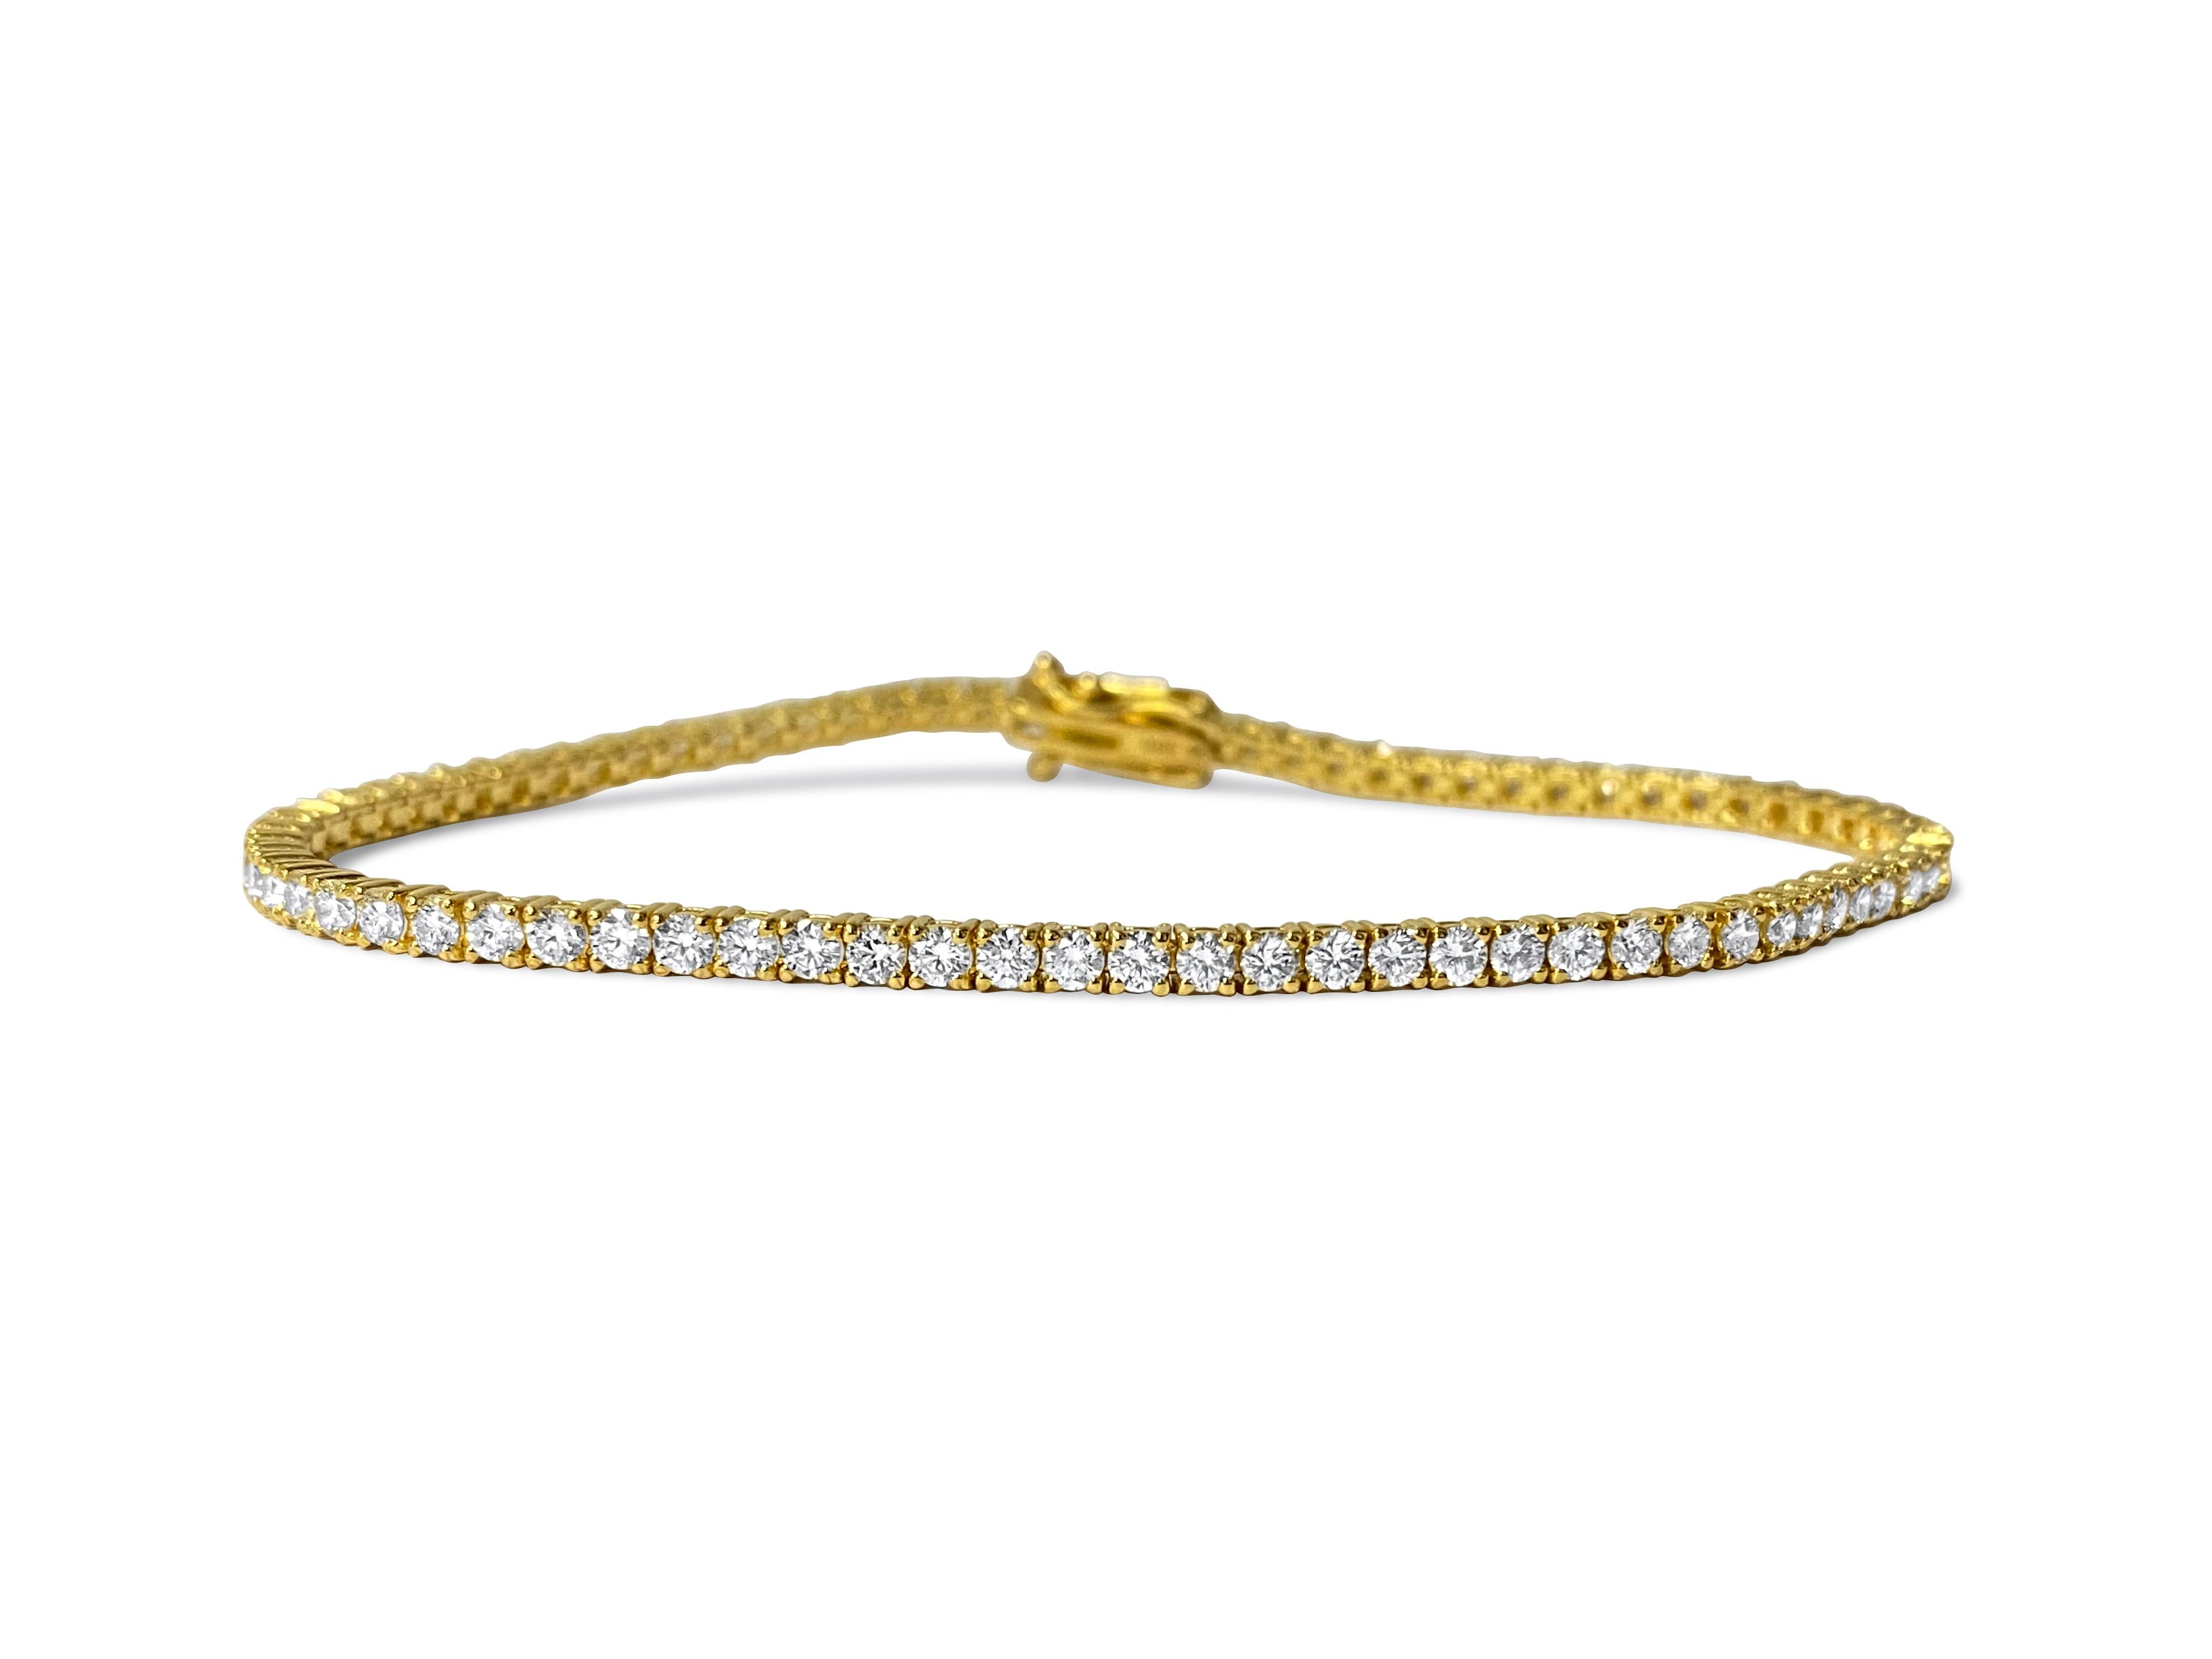 Metal: 10k yellow gold. Diamonds: 4.00 cwt. VVS clarity and H color. 100% natural earth mined diamonds. Round brilliant cut diamonds set in prongs. Gorgeous unisex diamond tennis bracelet. Top of the line quality and finish. Certification available